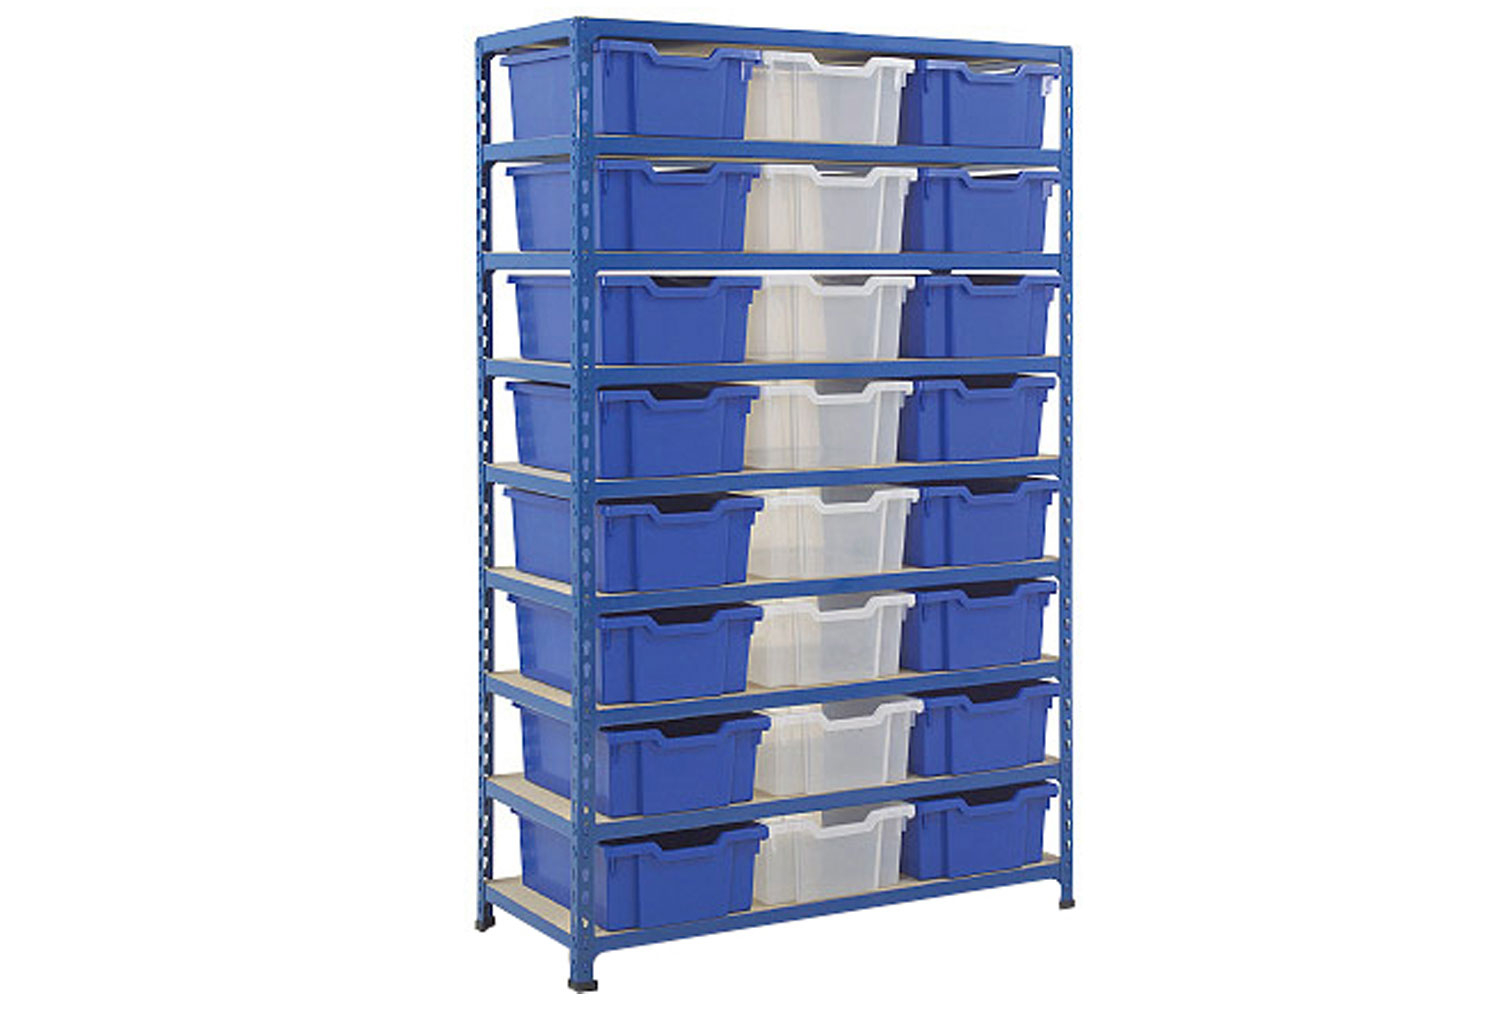 Rapid 2 Shelving Bay With 24 Deep Gratnells Trays, Clear Trays, Blue/Grey, Express Delivery